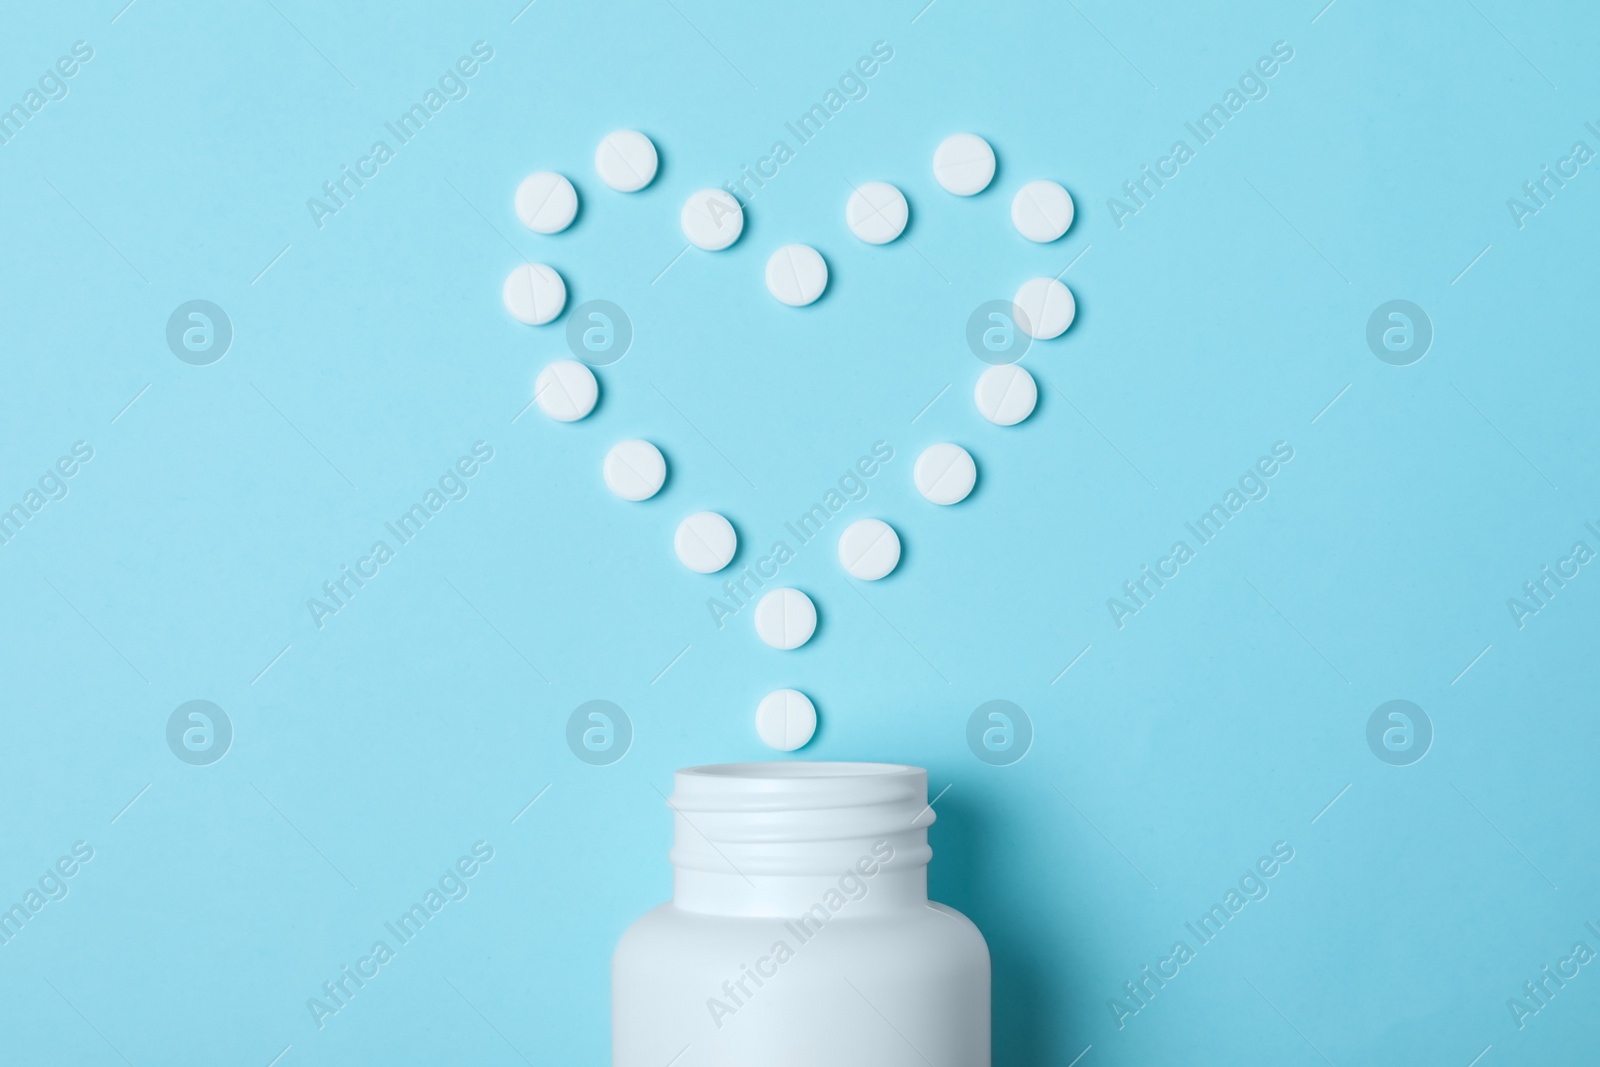 Photo of Heart made of pills and container on color background, top view. Cardiology concept